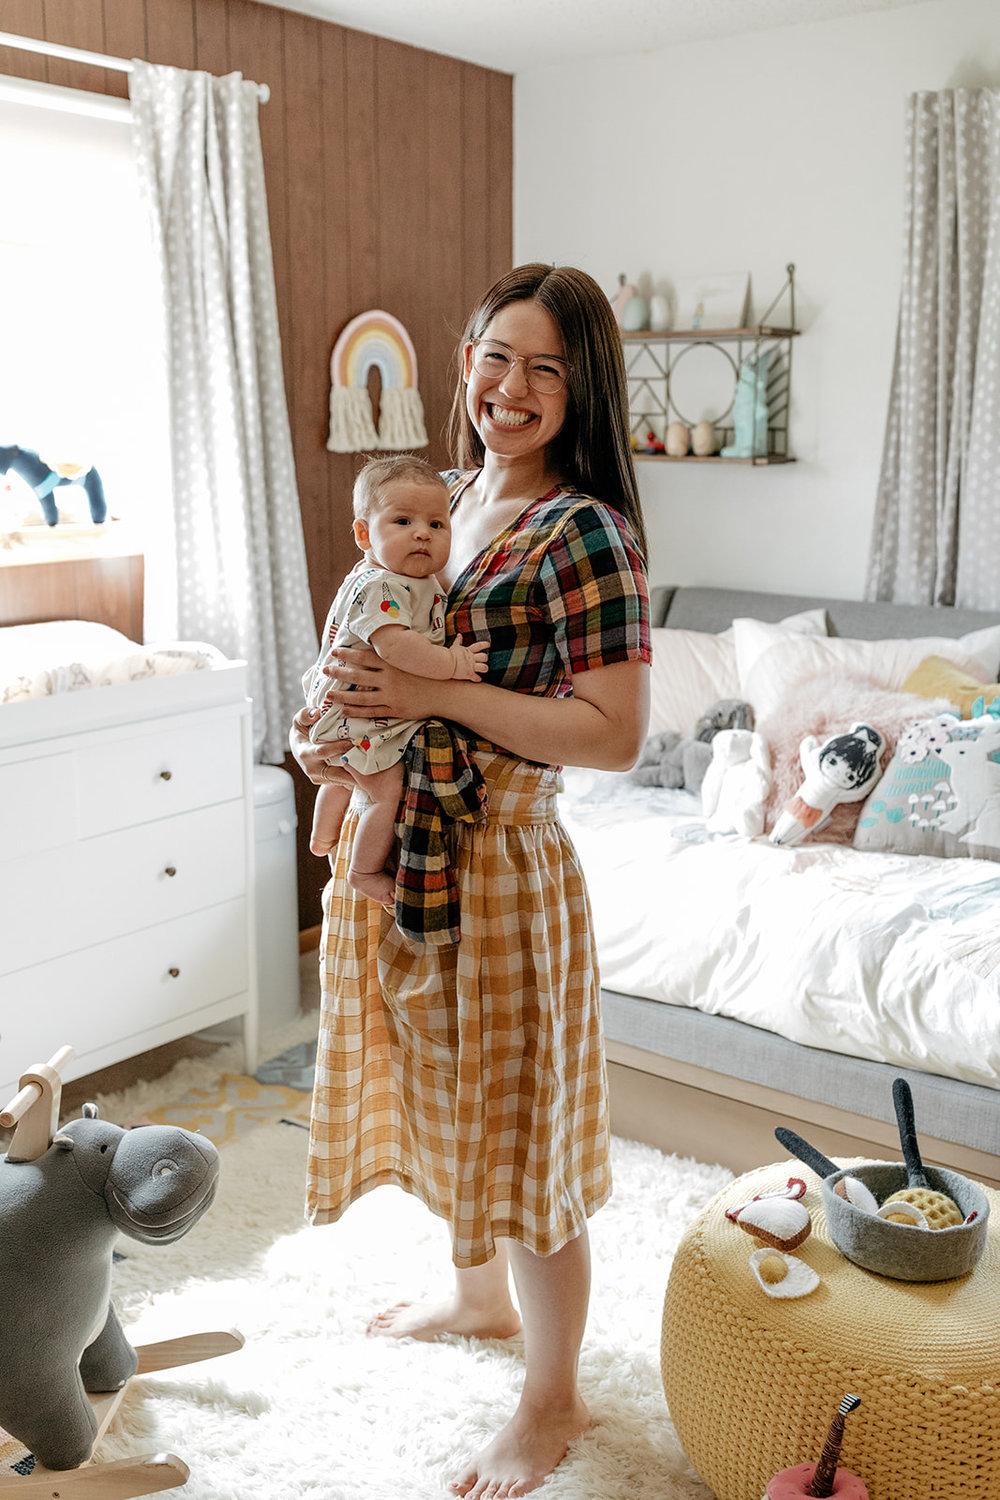 6-28-19-molly-yeh-crate-and-kids-173.jpg